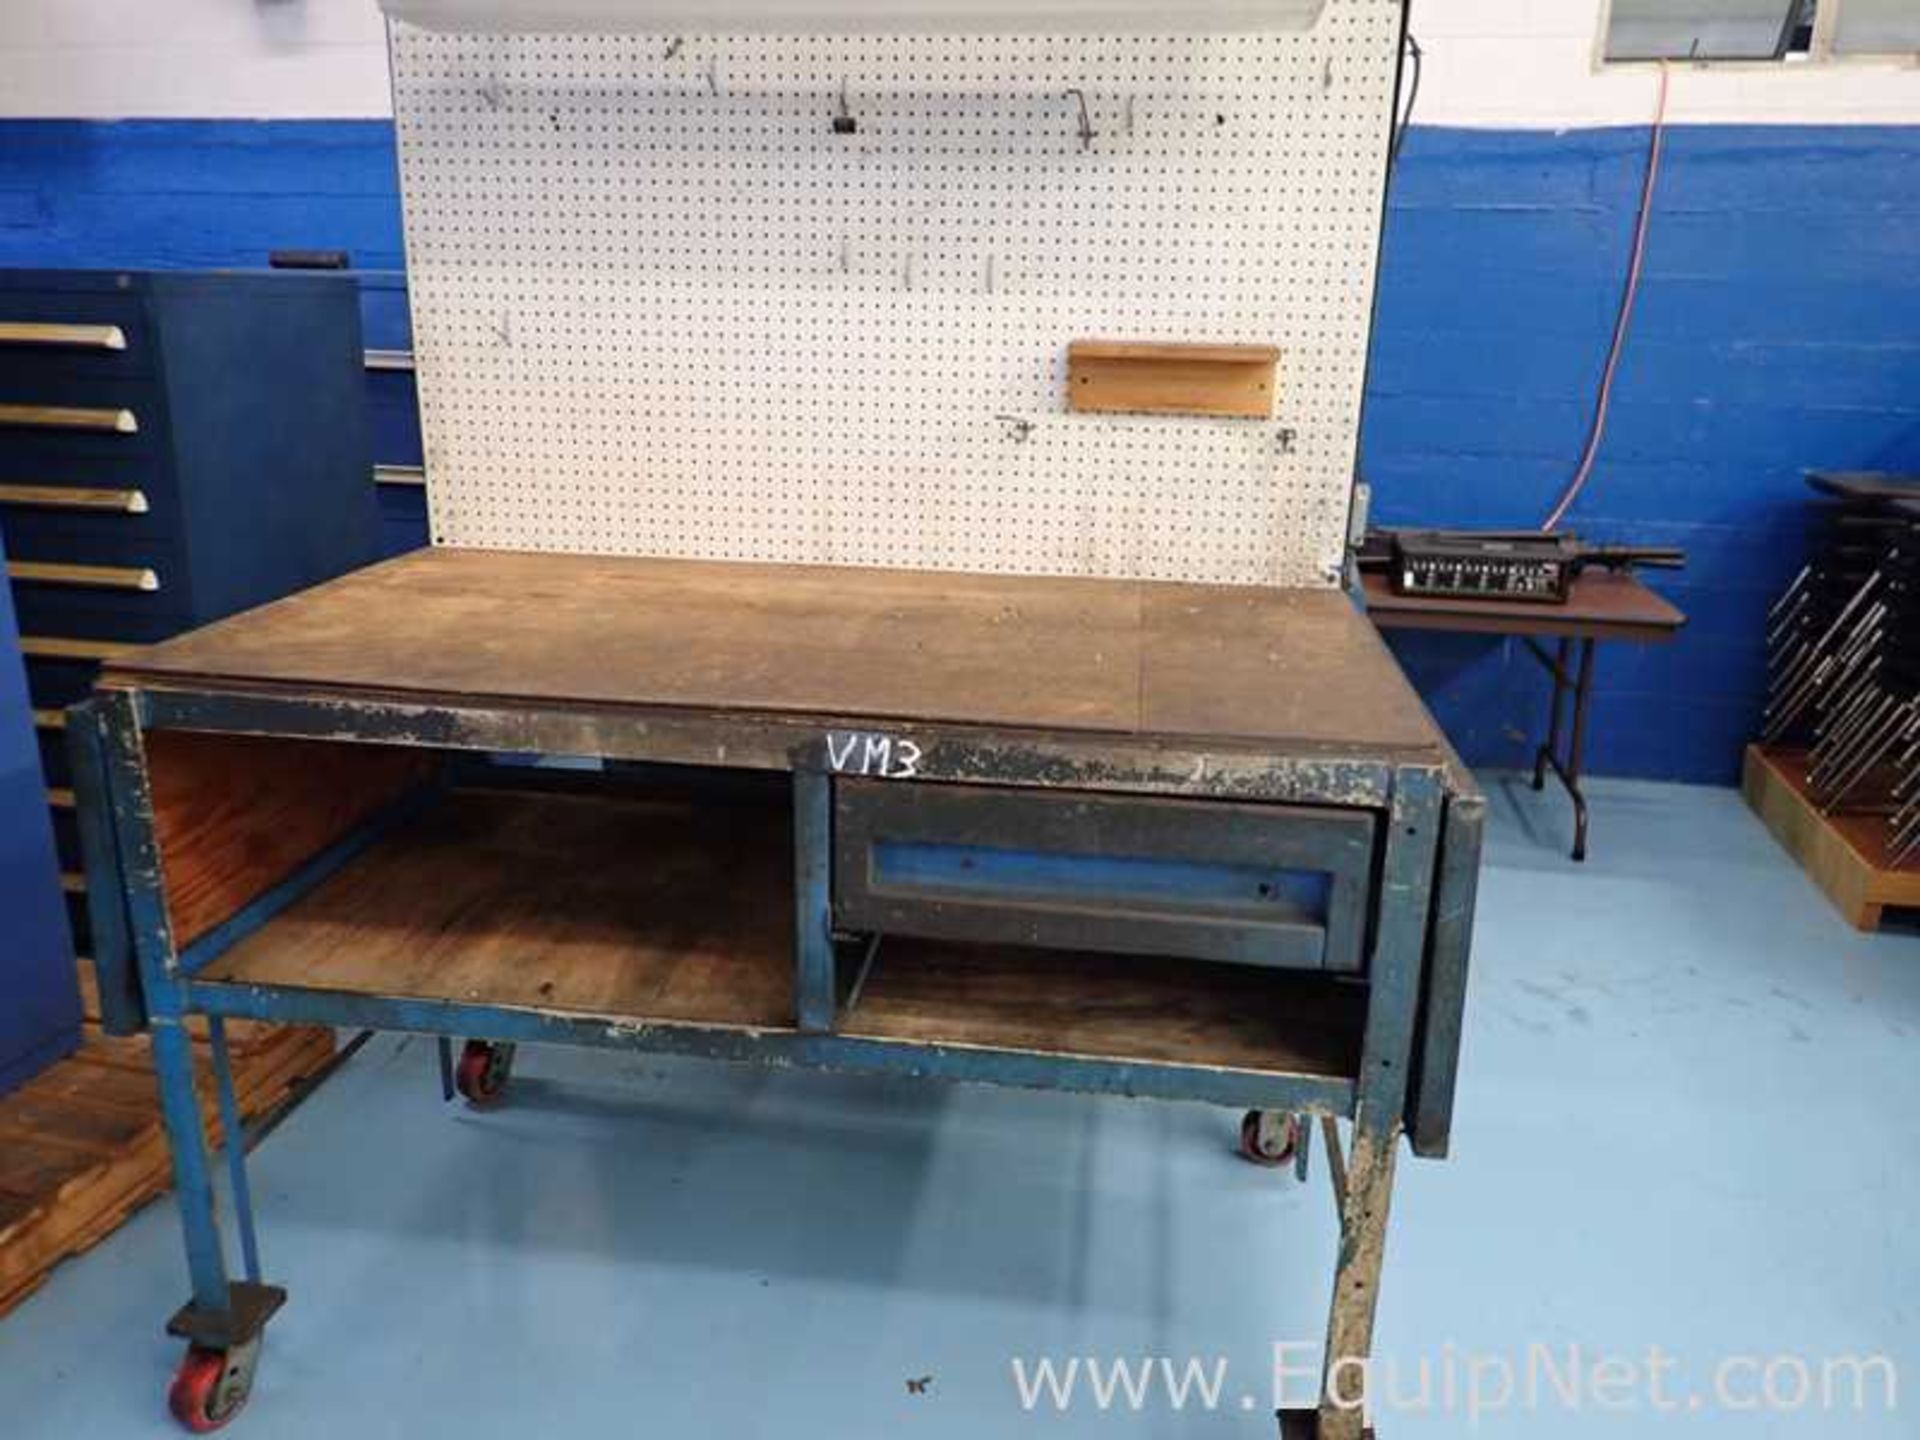 Lot of 2 Machine Shop Work Benches